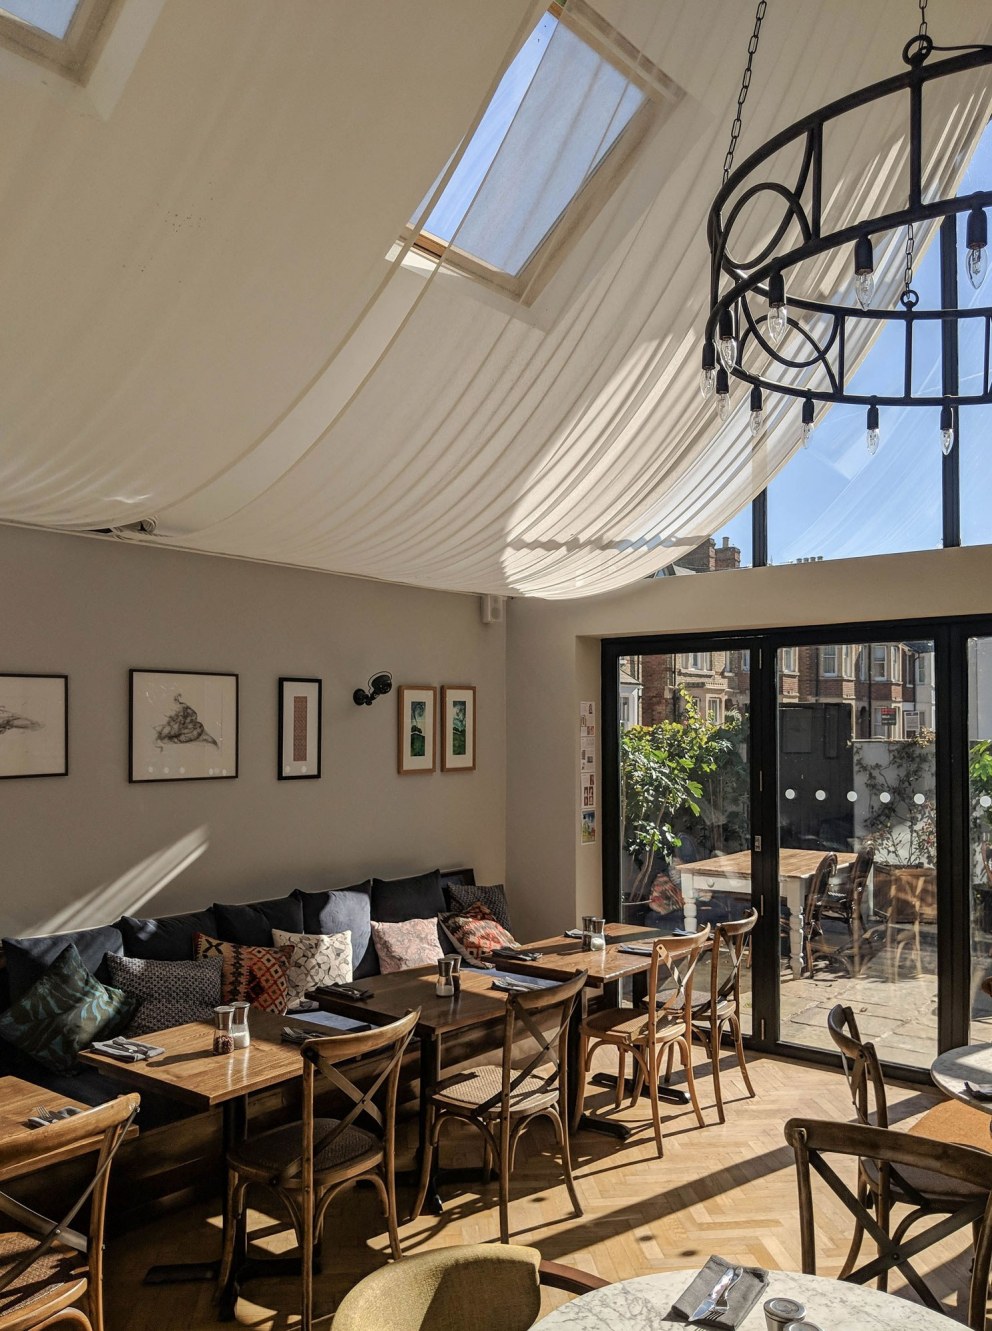 ThirtyEight, Summertown Oxford | Main dining room with bespoke linen ceiling sails, softening the view out onto the private courtyard | Interior Designers